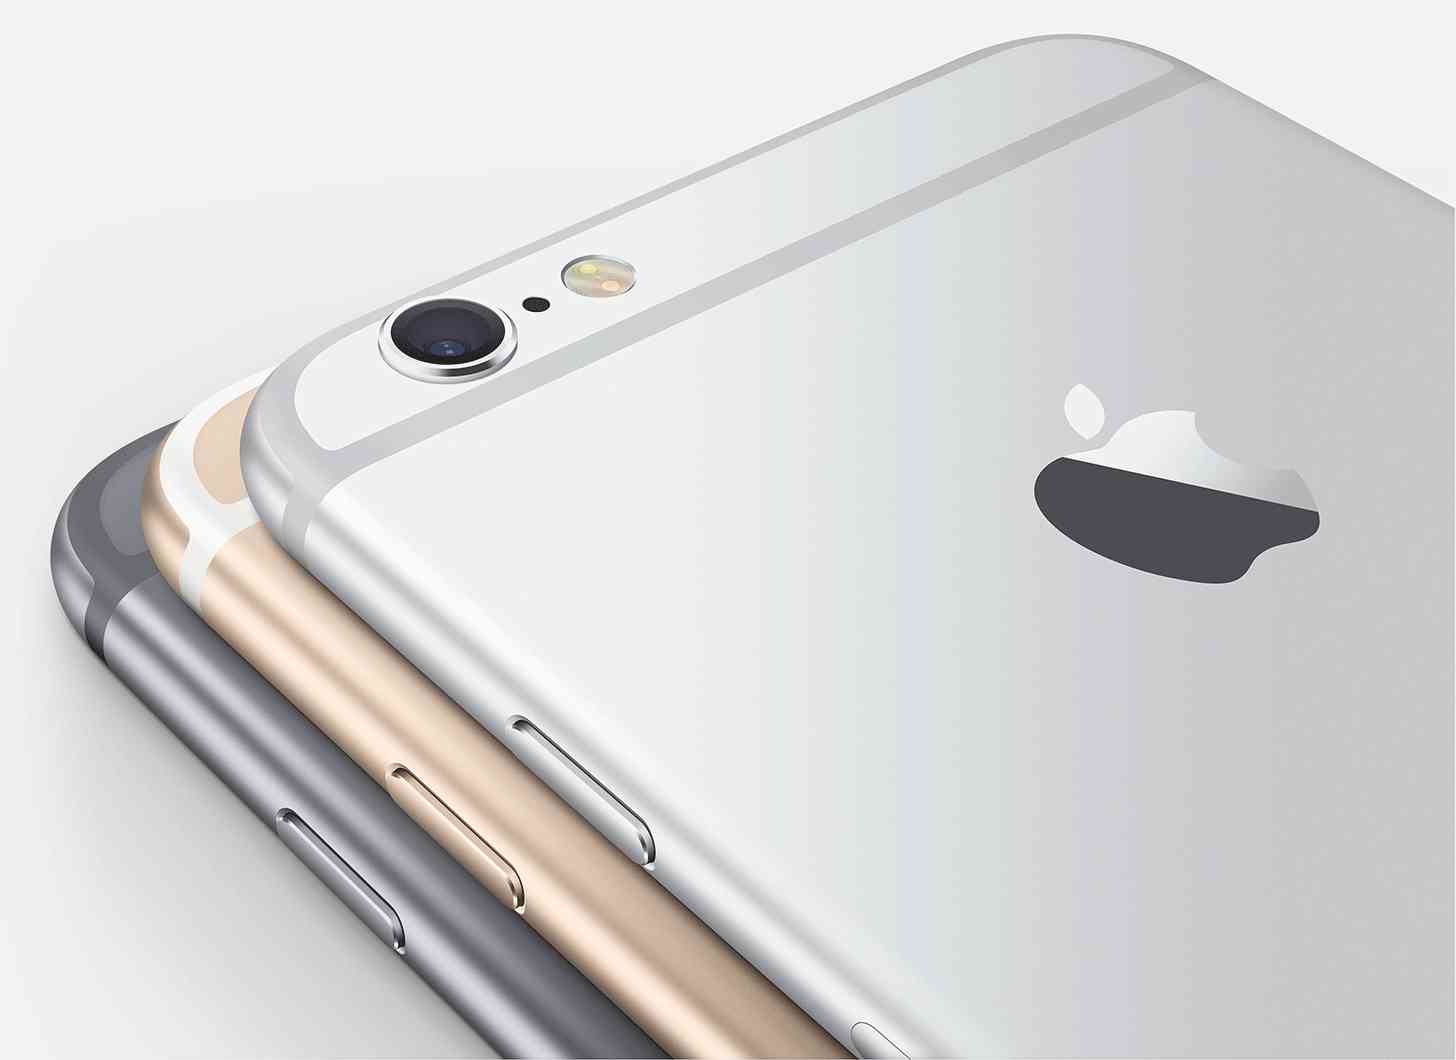 iPhone 6 colors